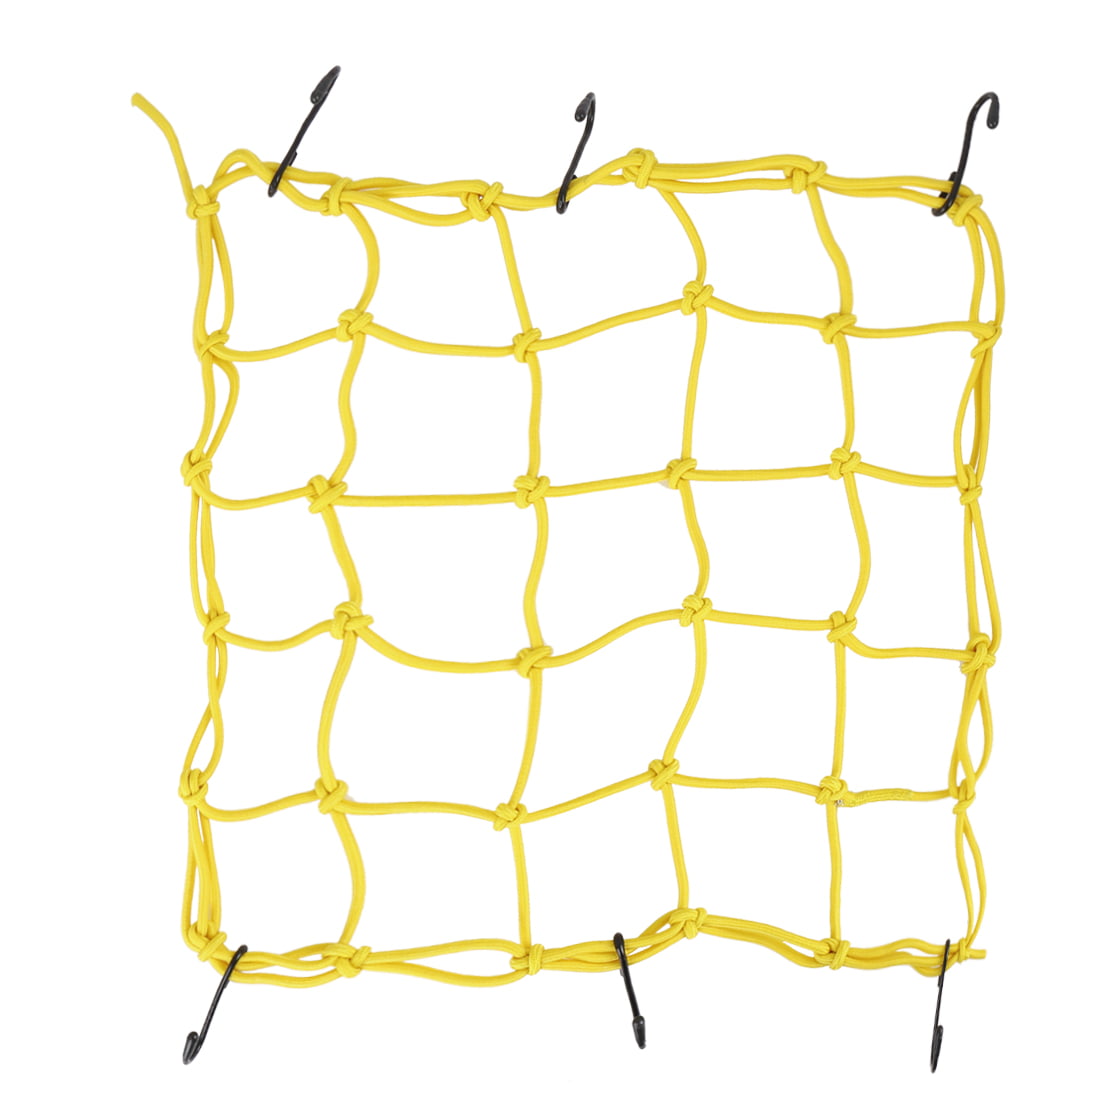 Bungee Motorcycle Helmet Cargo Net 6 Hooks Luggage/Package Cargo Net Load Cover Cord Web-Yellow